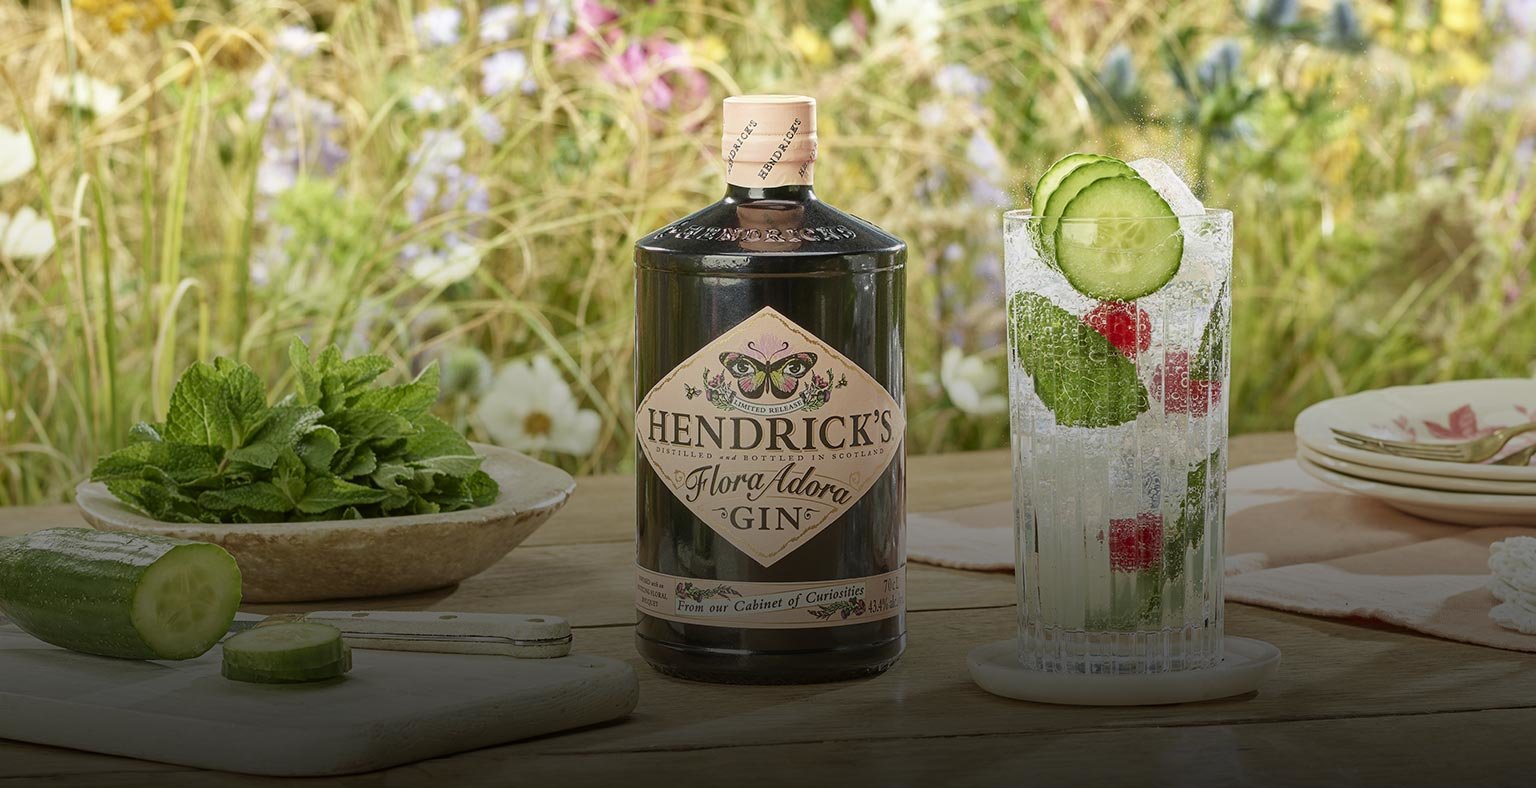 A bottle of Hendricks Flora Adora, a cocktail and garnishes on a table